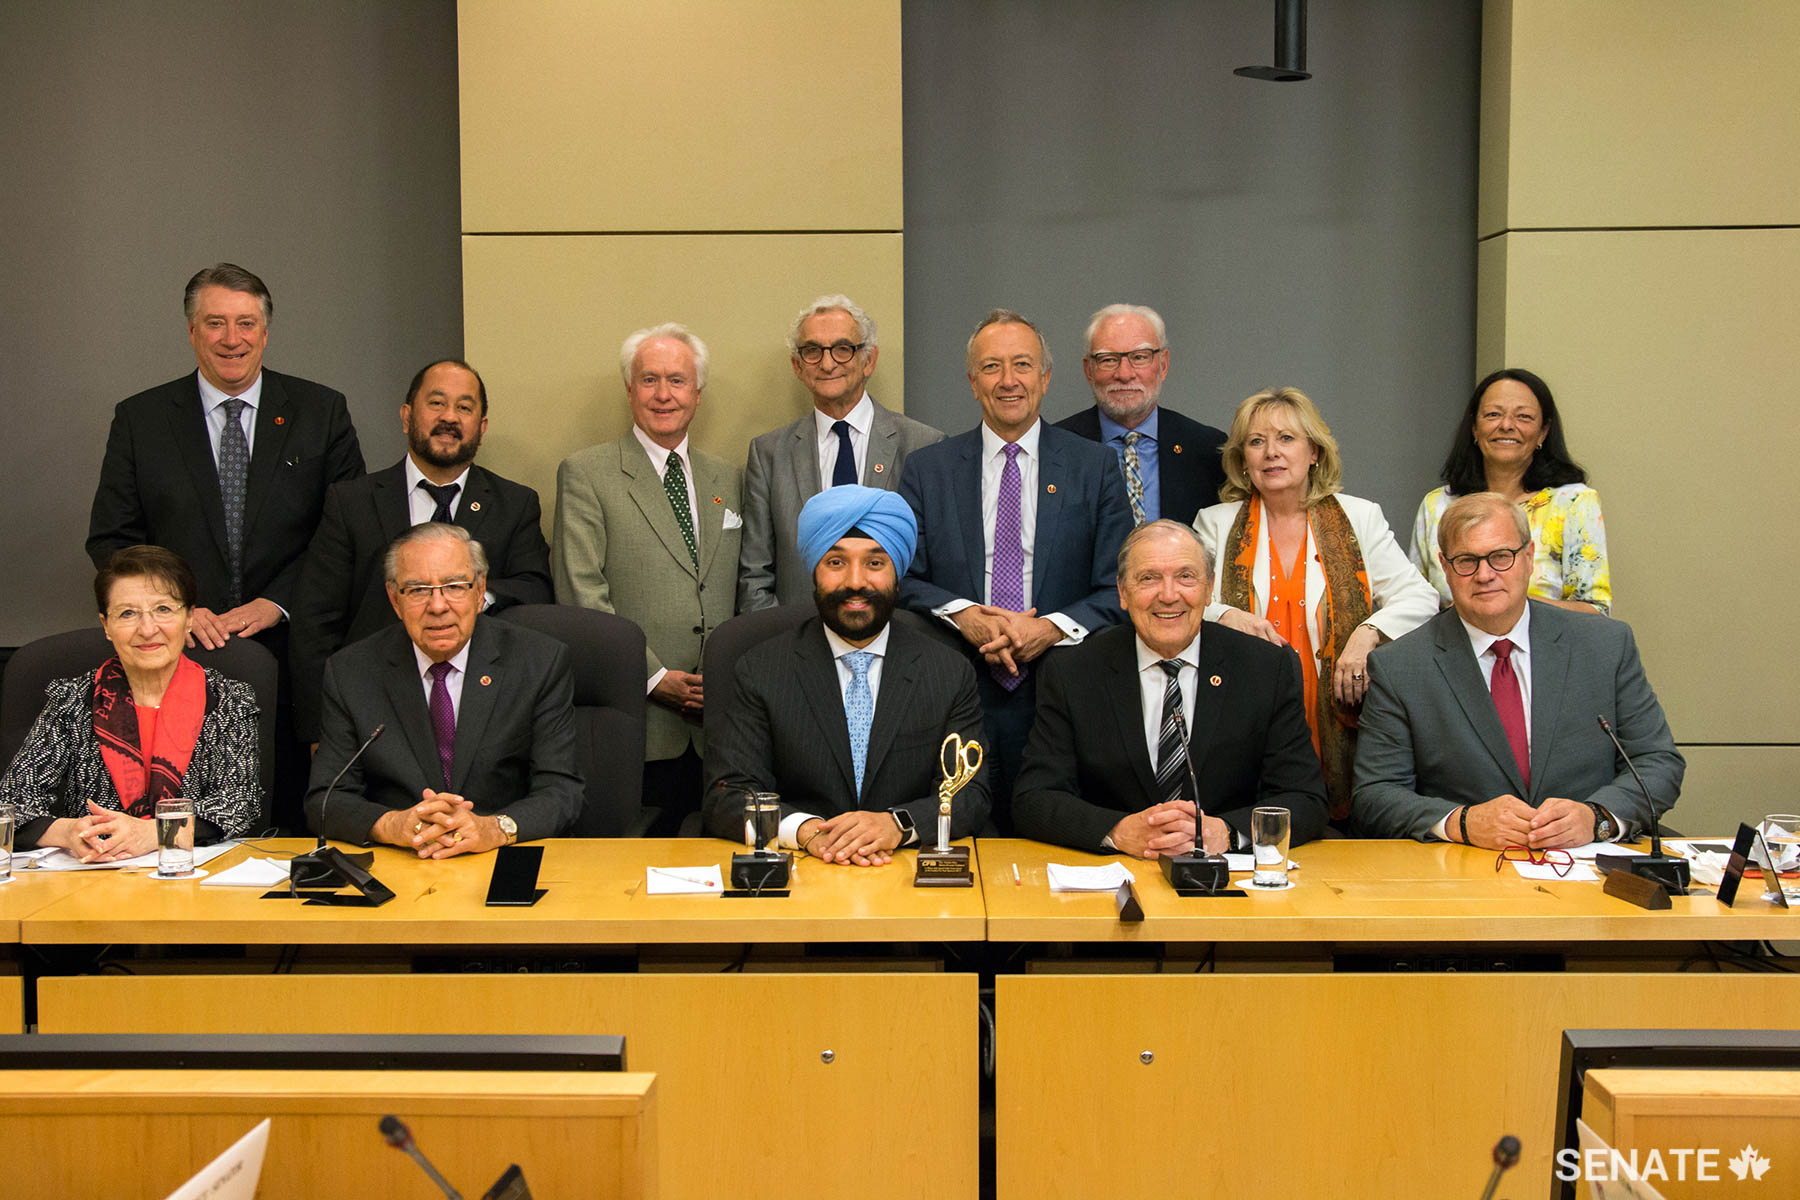 Members of the Senate Committee on Banking, Trade and Commerce heard from Minister Navdeep Bains on the recently signed interprovincial trade deal.